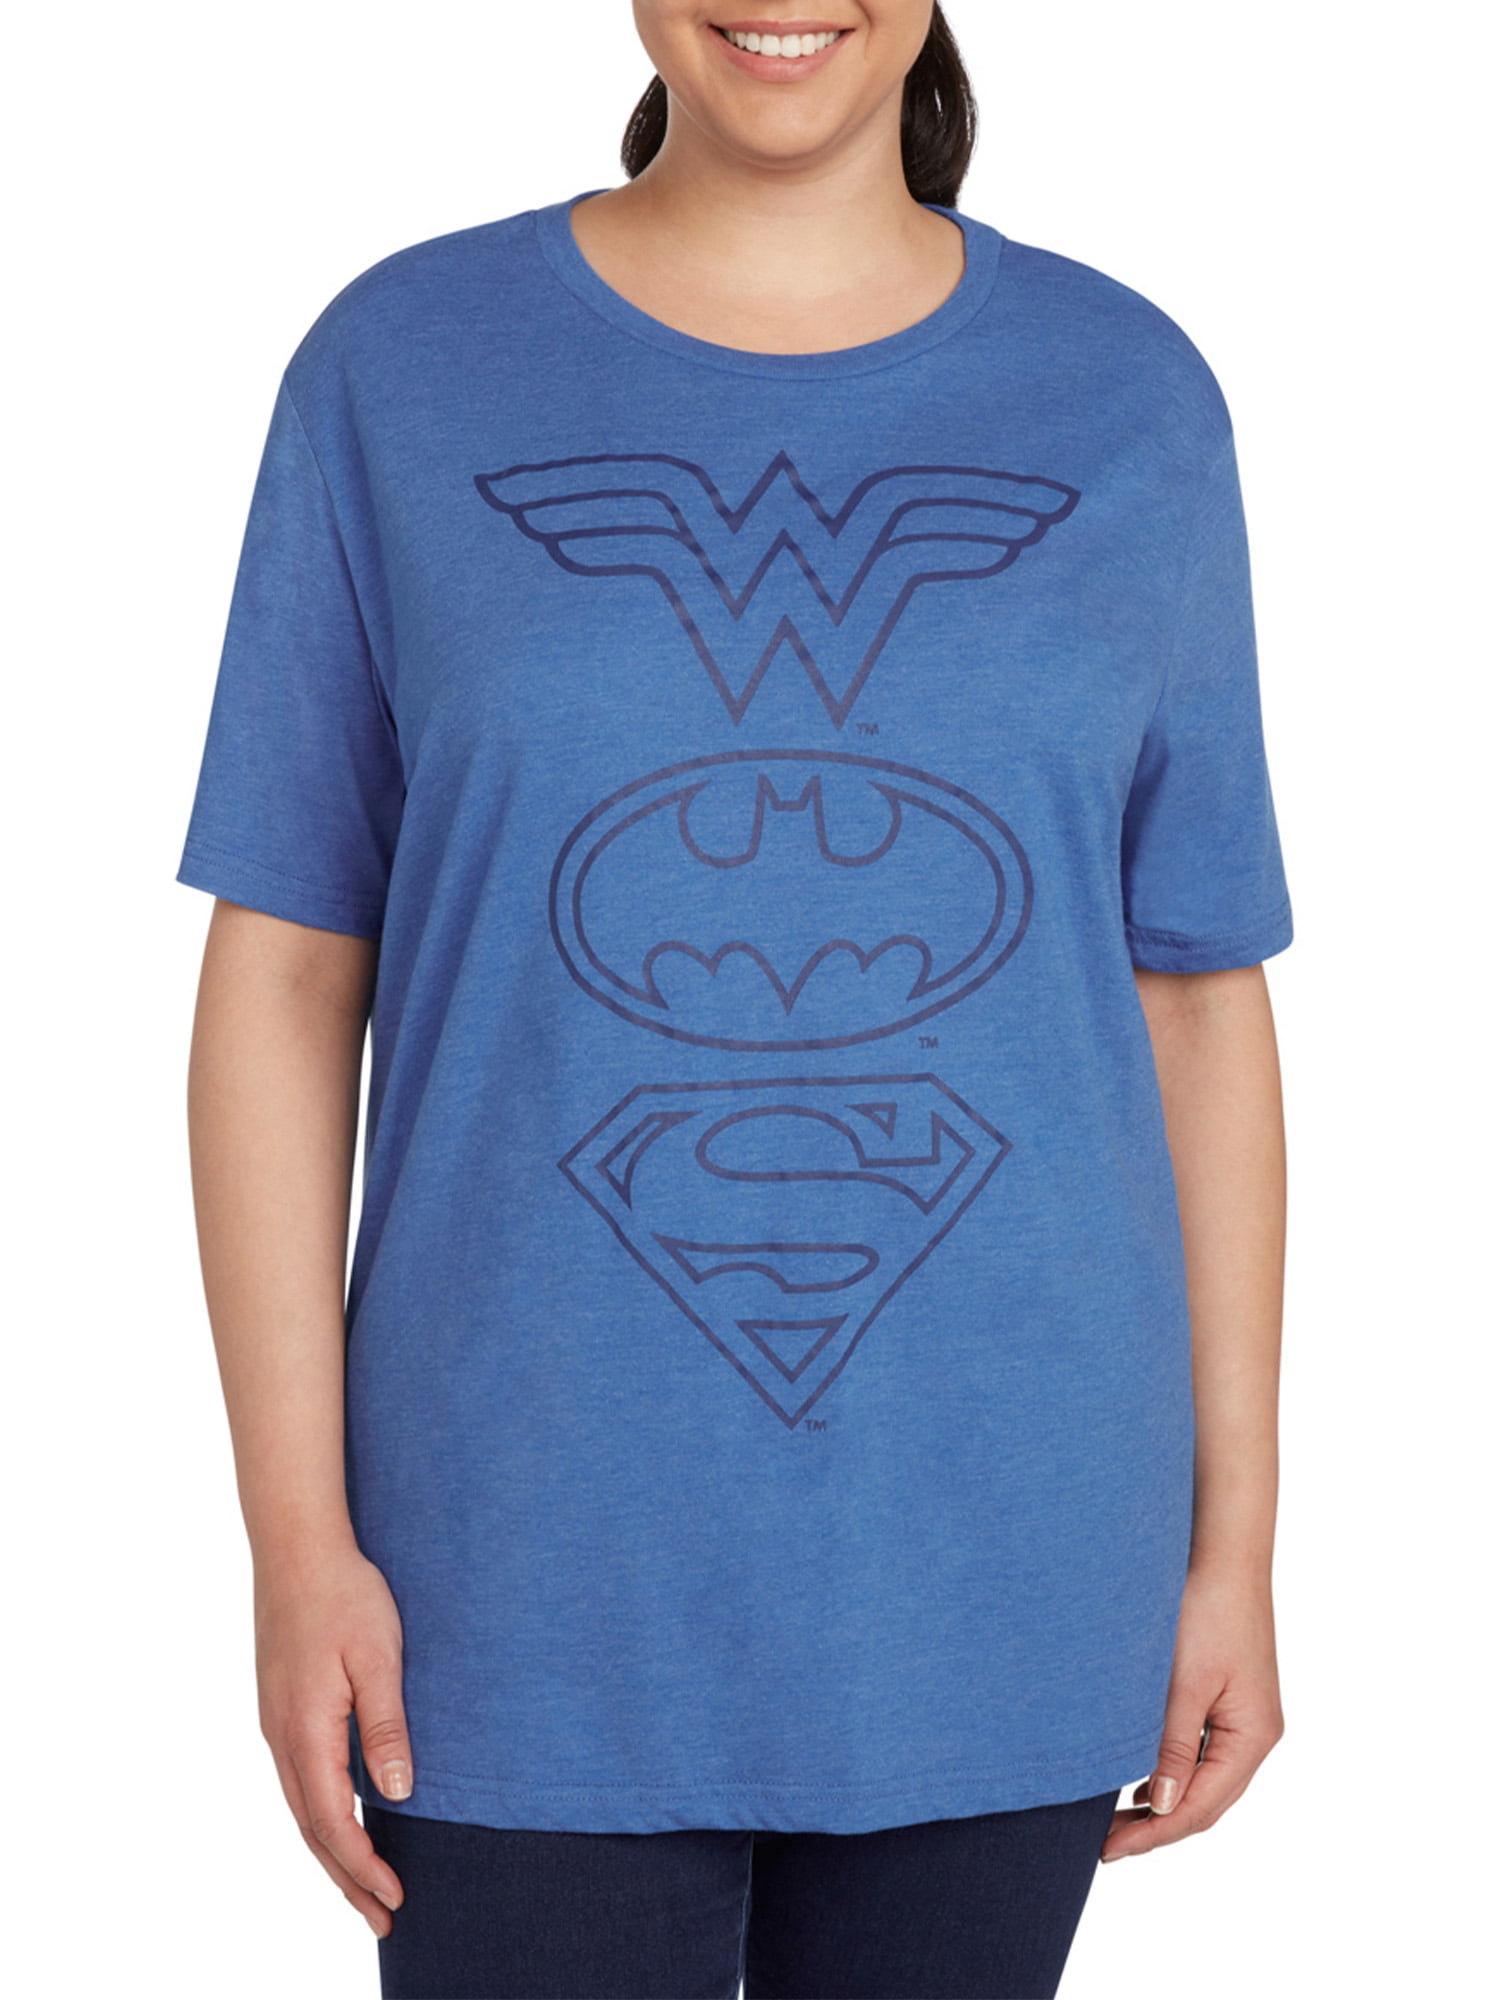 Officially Licensed DC Comics Women/'s Plus Size Supergirl T-Shirt Halloween